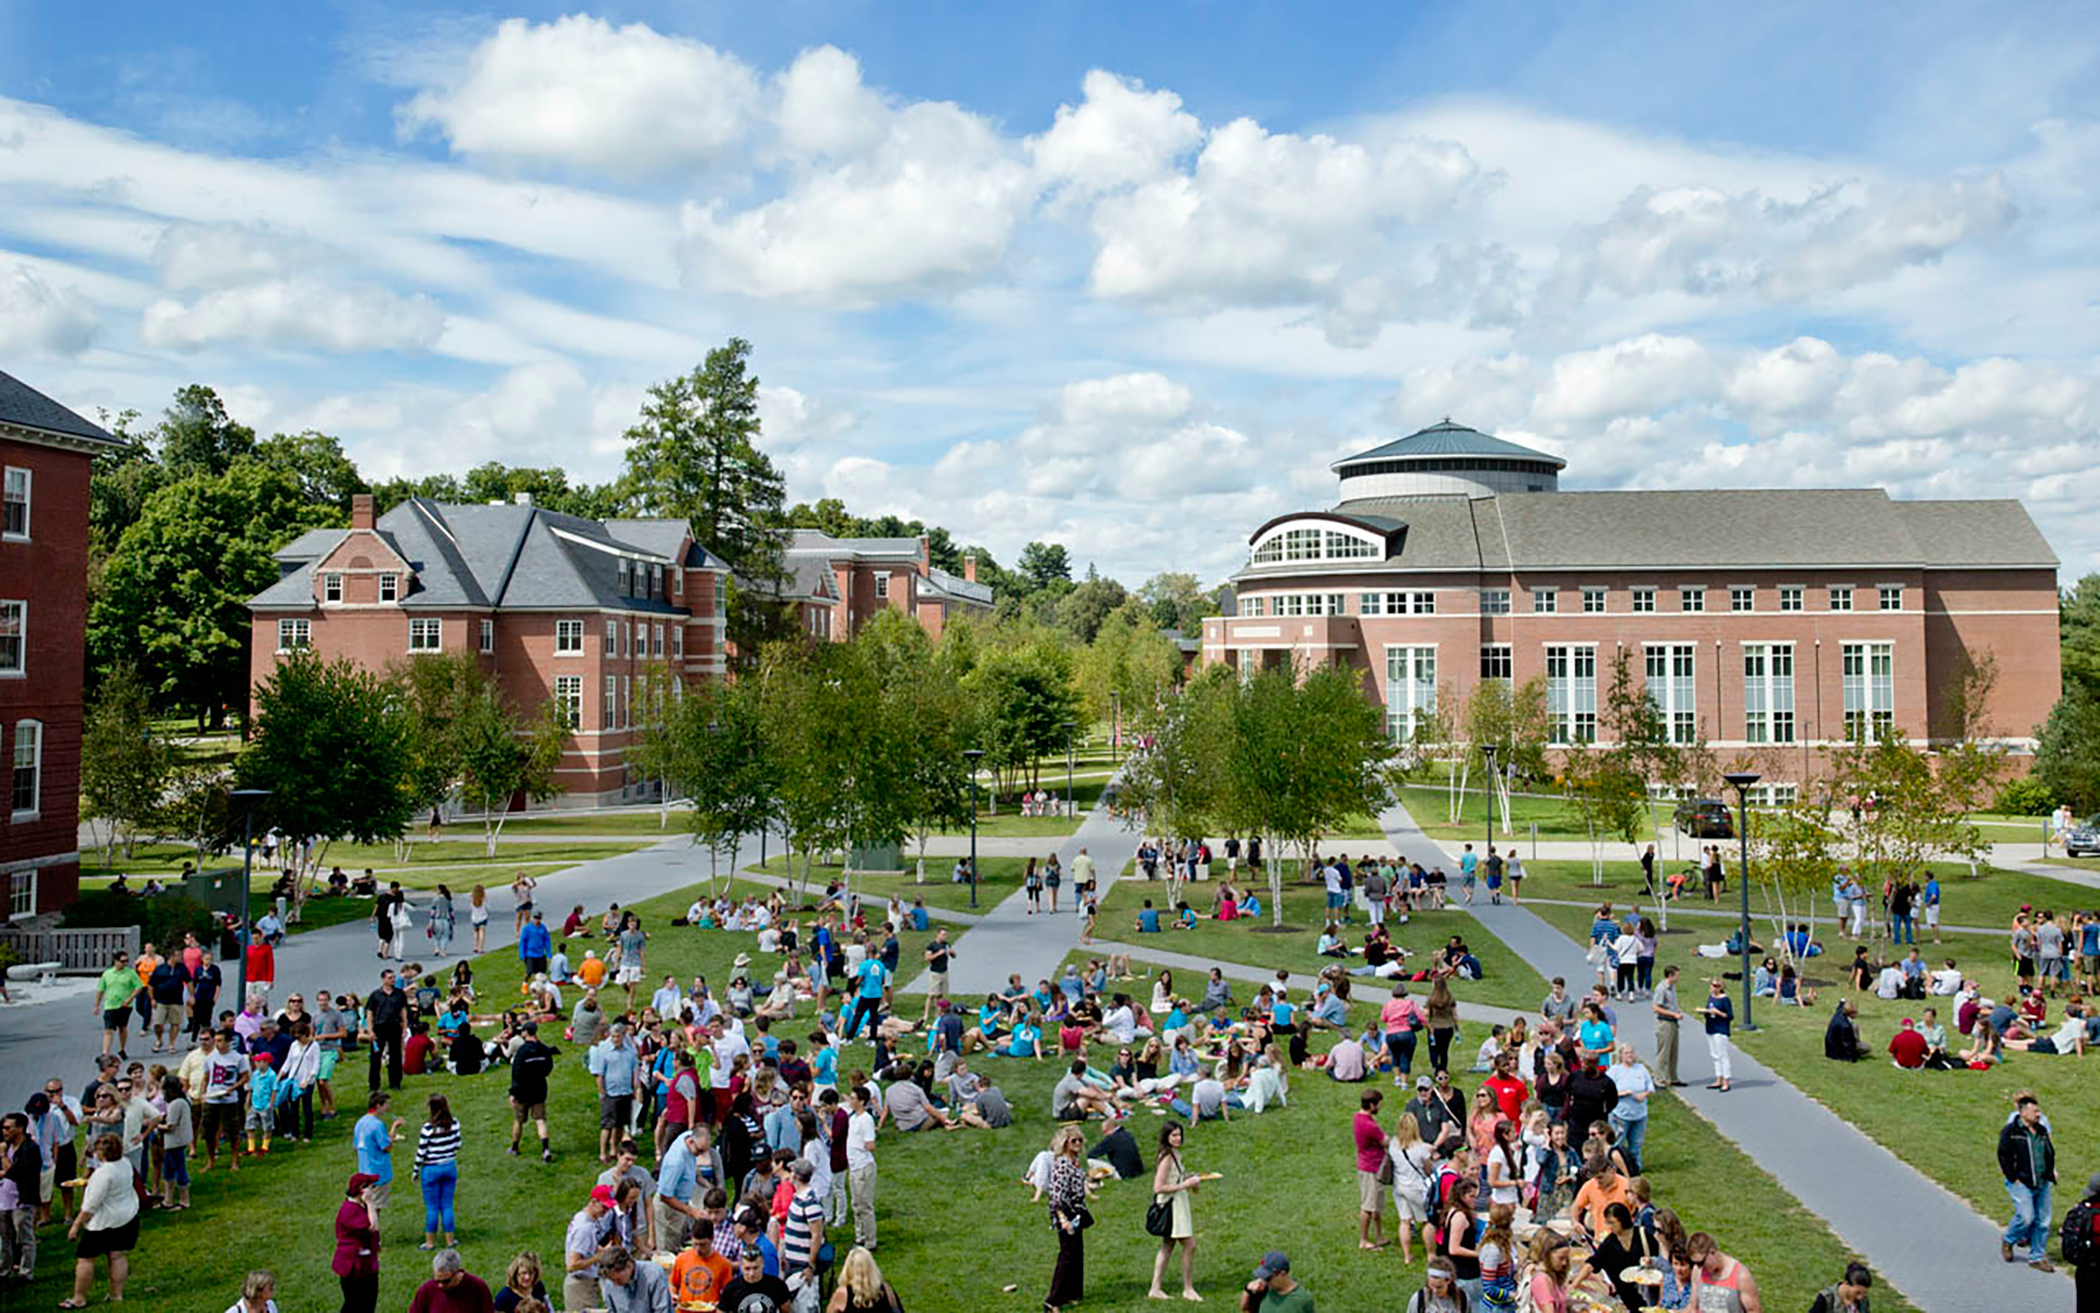 <a href="http://new.money.com/best-colleges/profile/bates-college" target="_blank">15. Bates College</a>
                                            
                                             	Early earnings: $46,700
                                             	Mid-career earnings: $105,000
                                            